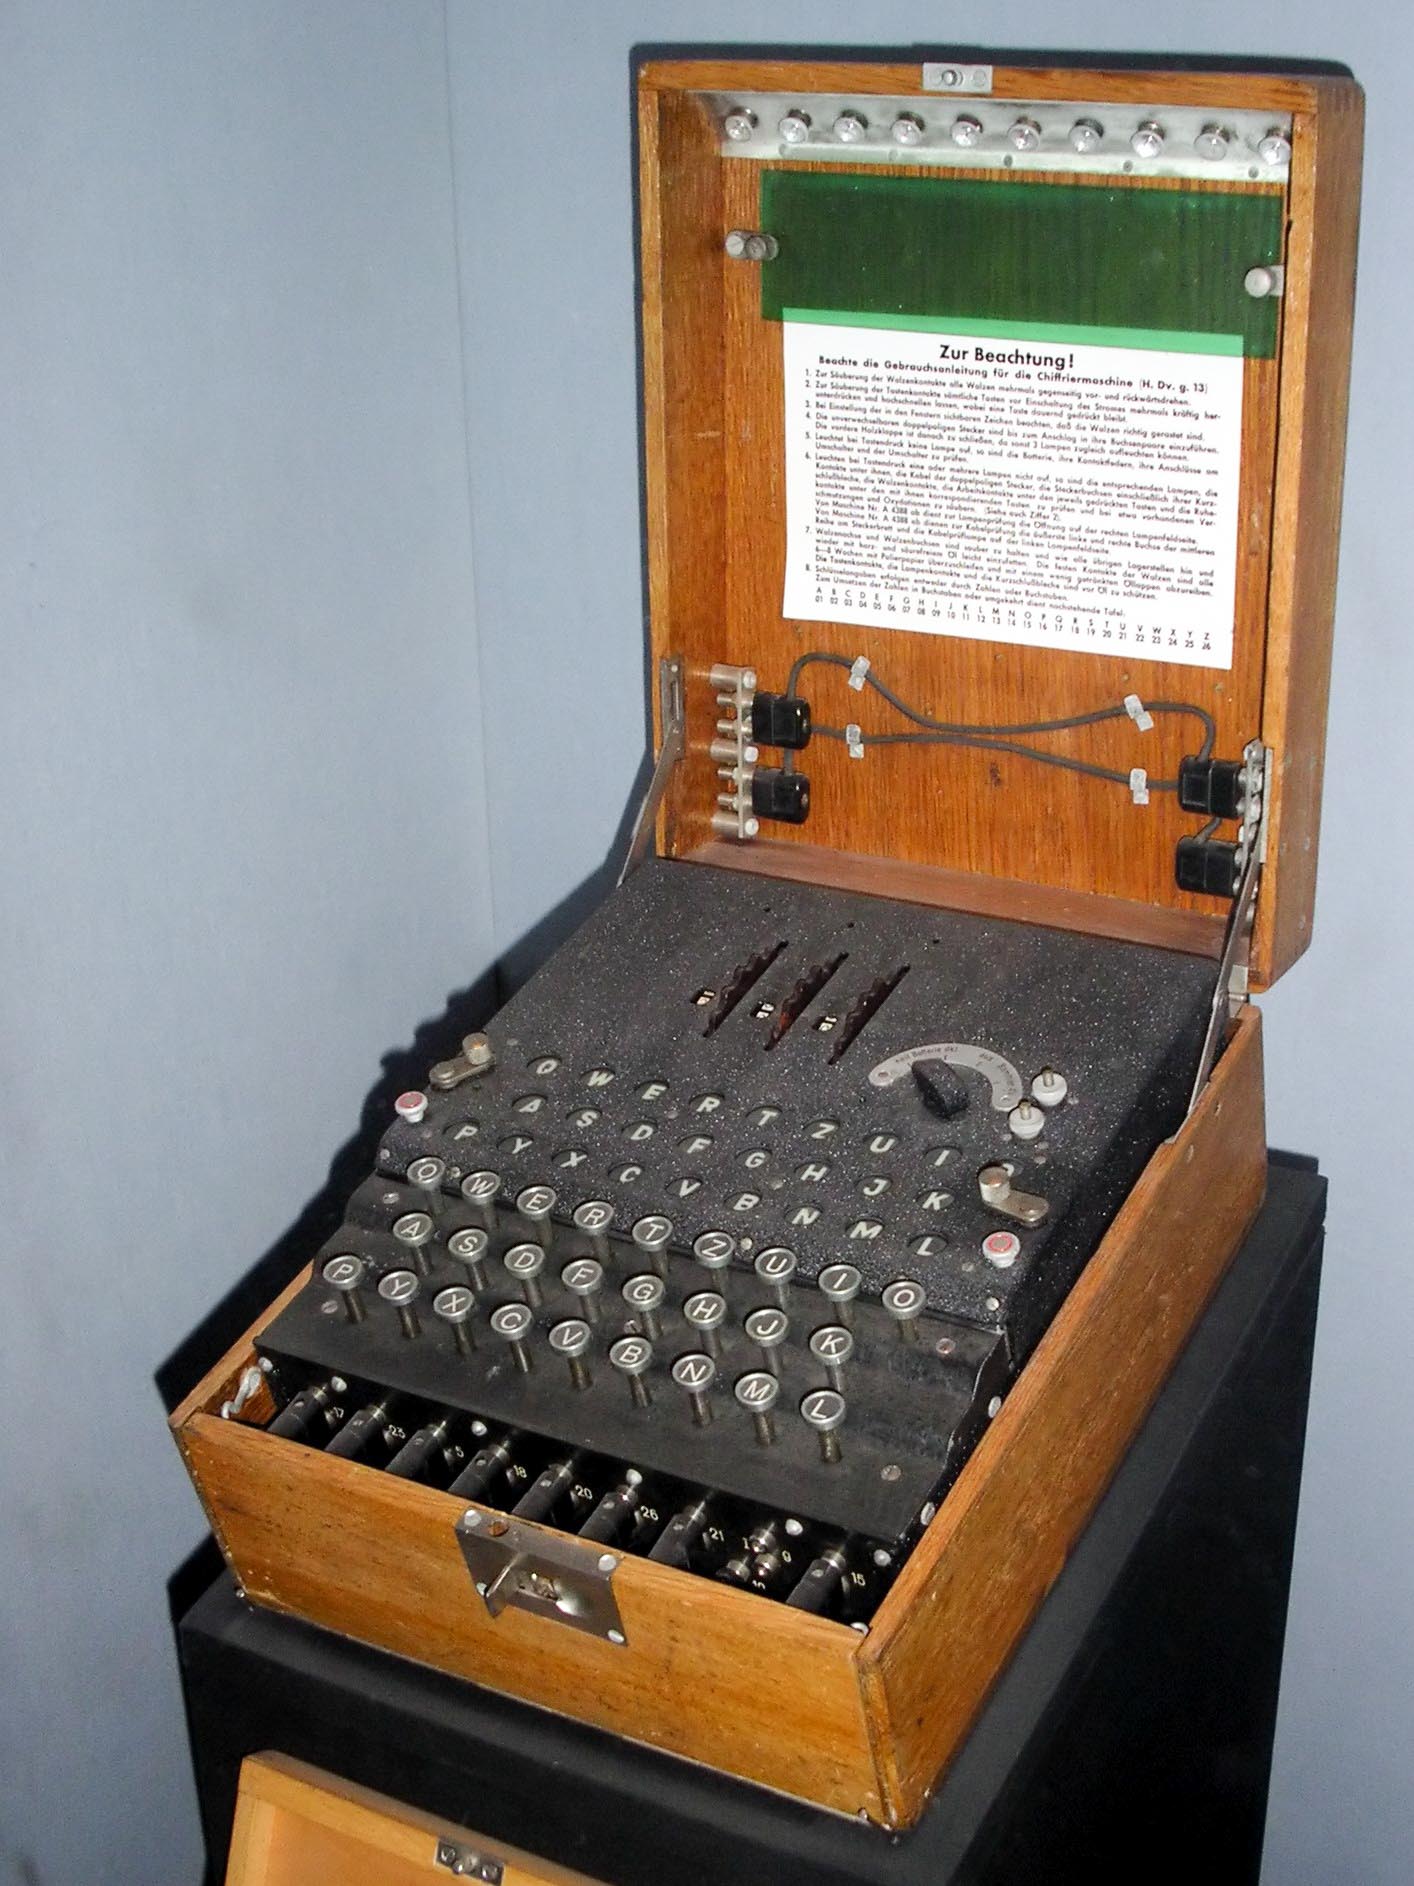 Enigma machine at the Imperial War Museum, London. Photo by Karsten Sperling (2004). PD-Author release. Wikimedia Commons.